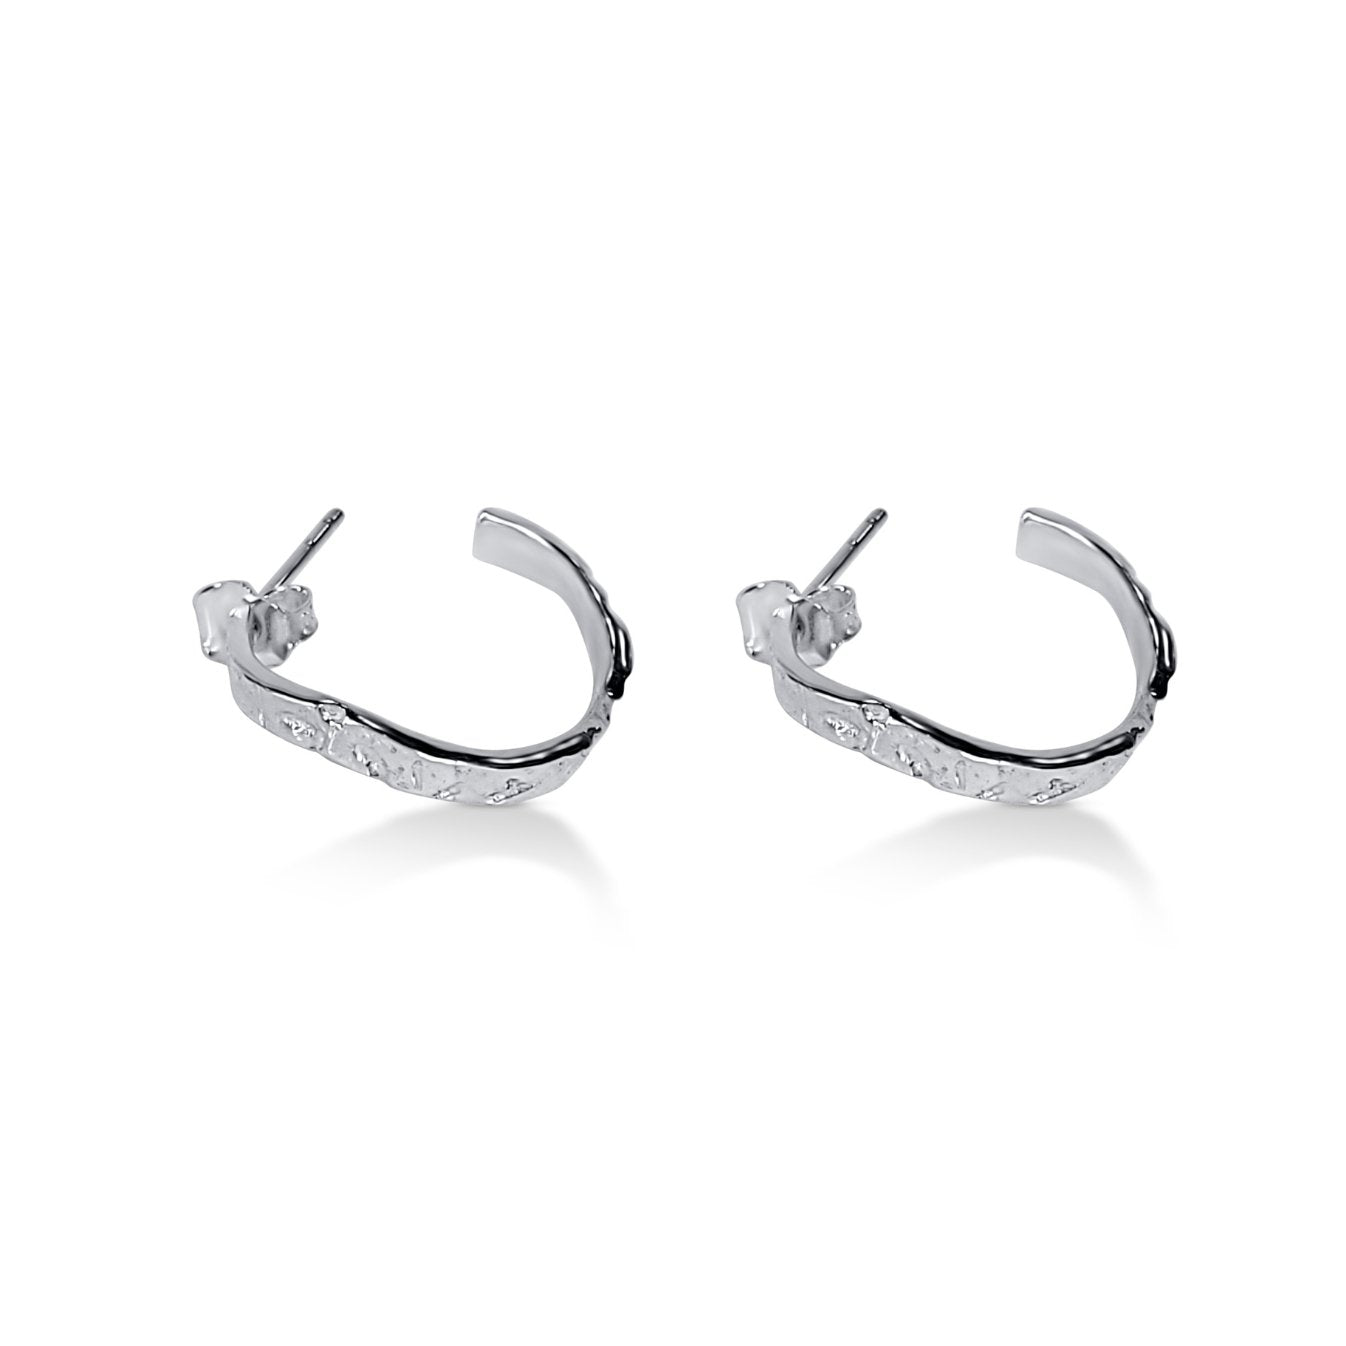 organic wavy lightweight hoop earrings in sterling silver with natural wood texture